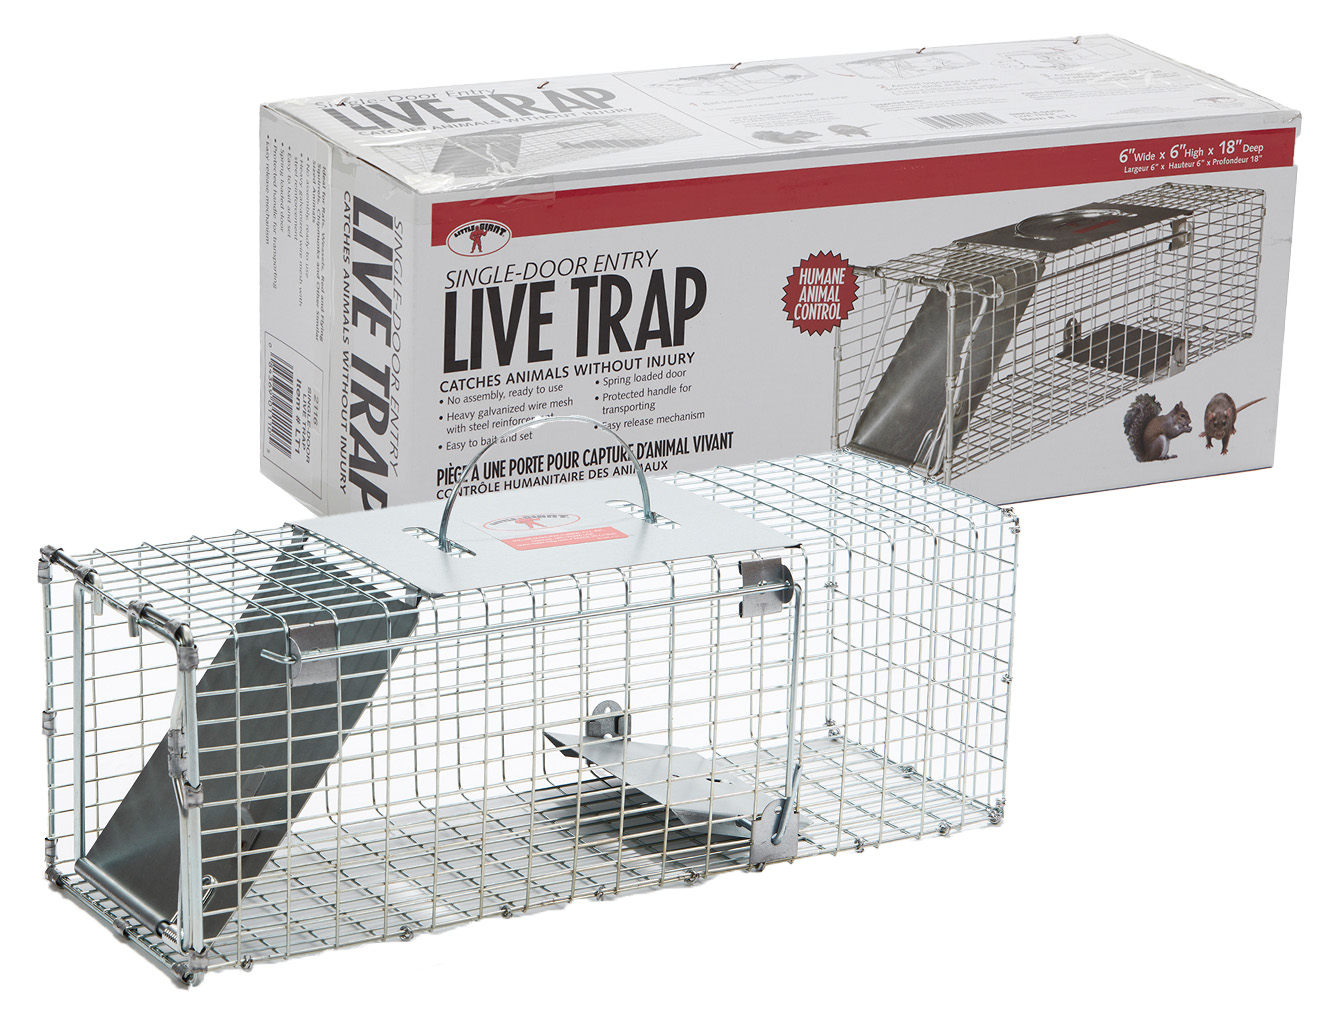 New Video: How to Set the Little Giant® Live Animal Traps - Miller